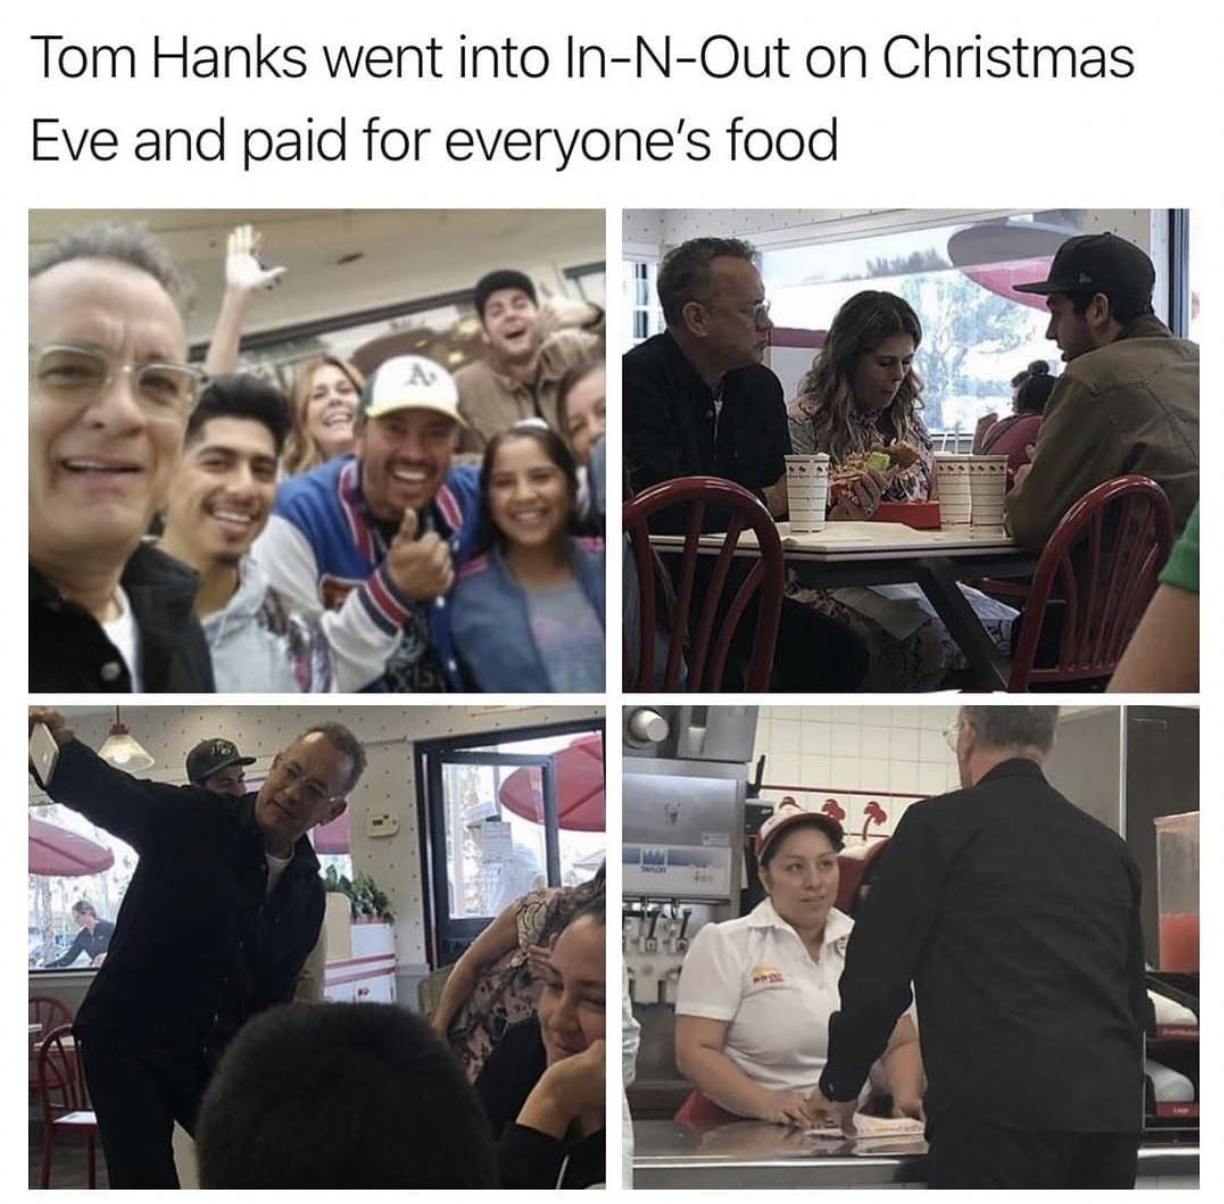 presentation - Tom Hanks went into InNOut on Christmas Eve and paid for everyone's food